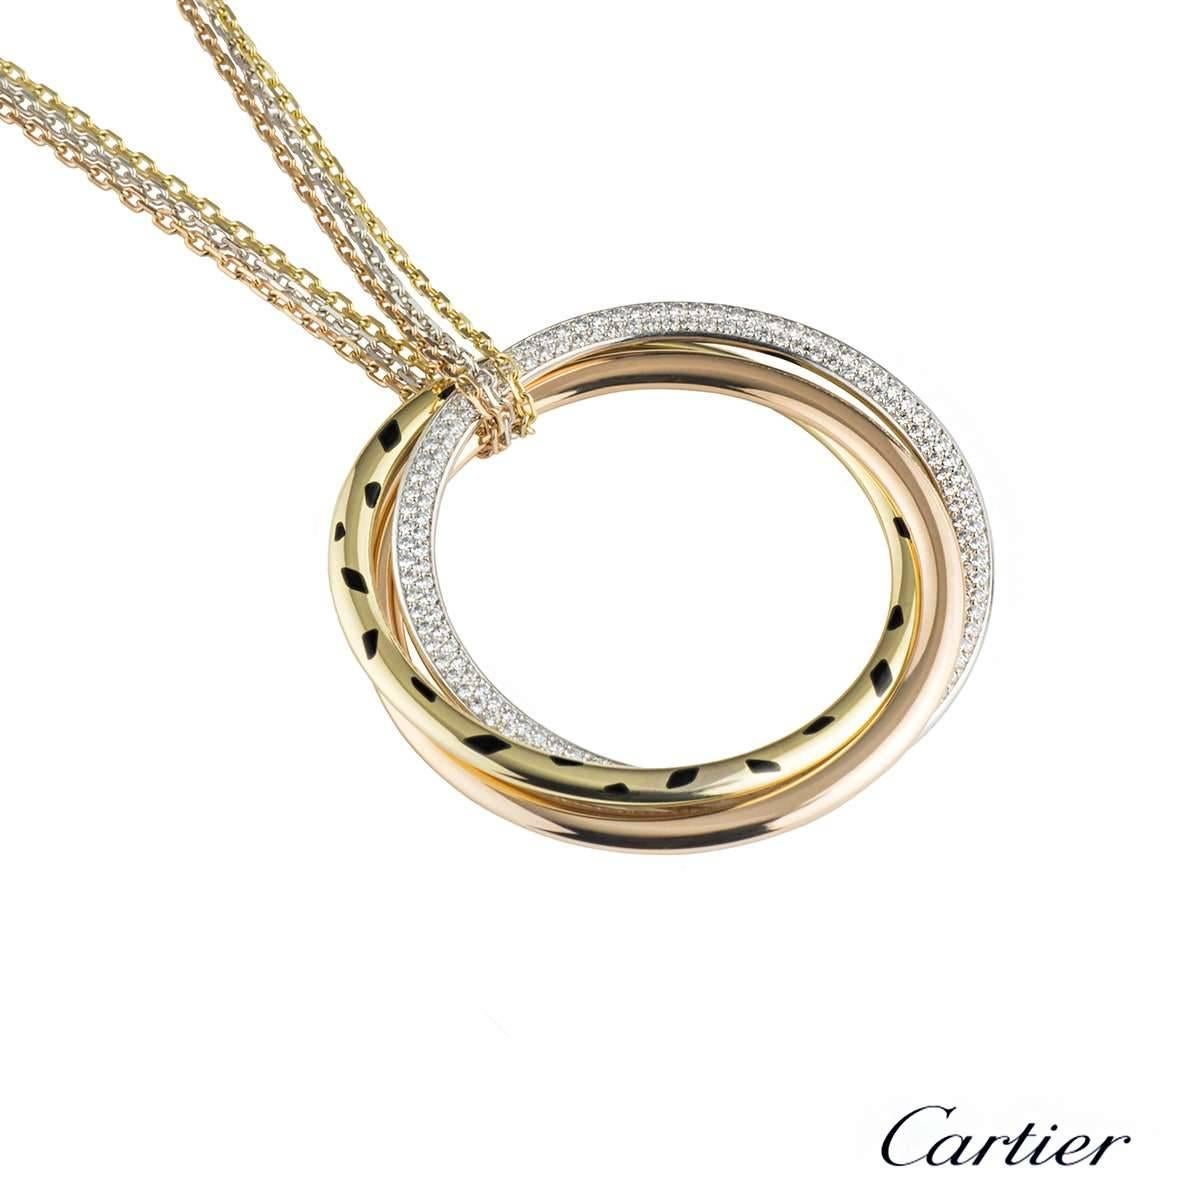 A stylish 18k tri-colour gold Cartier diamond and lacquer pendant from the Trinity de Cartier collection. The pendant comprises with 3 intertwined circle motifs. The white gold motif is pave set with 178 round brilliant cut diamonds with a total